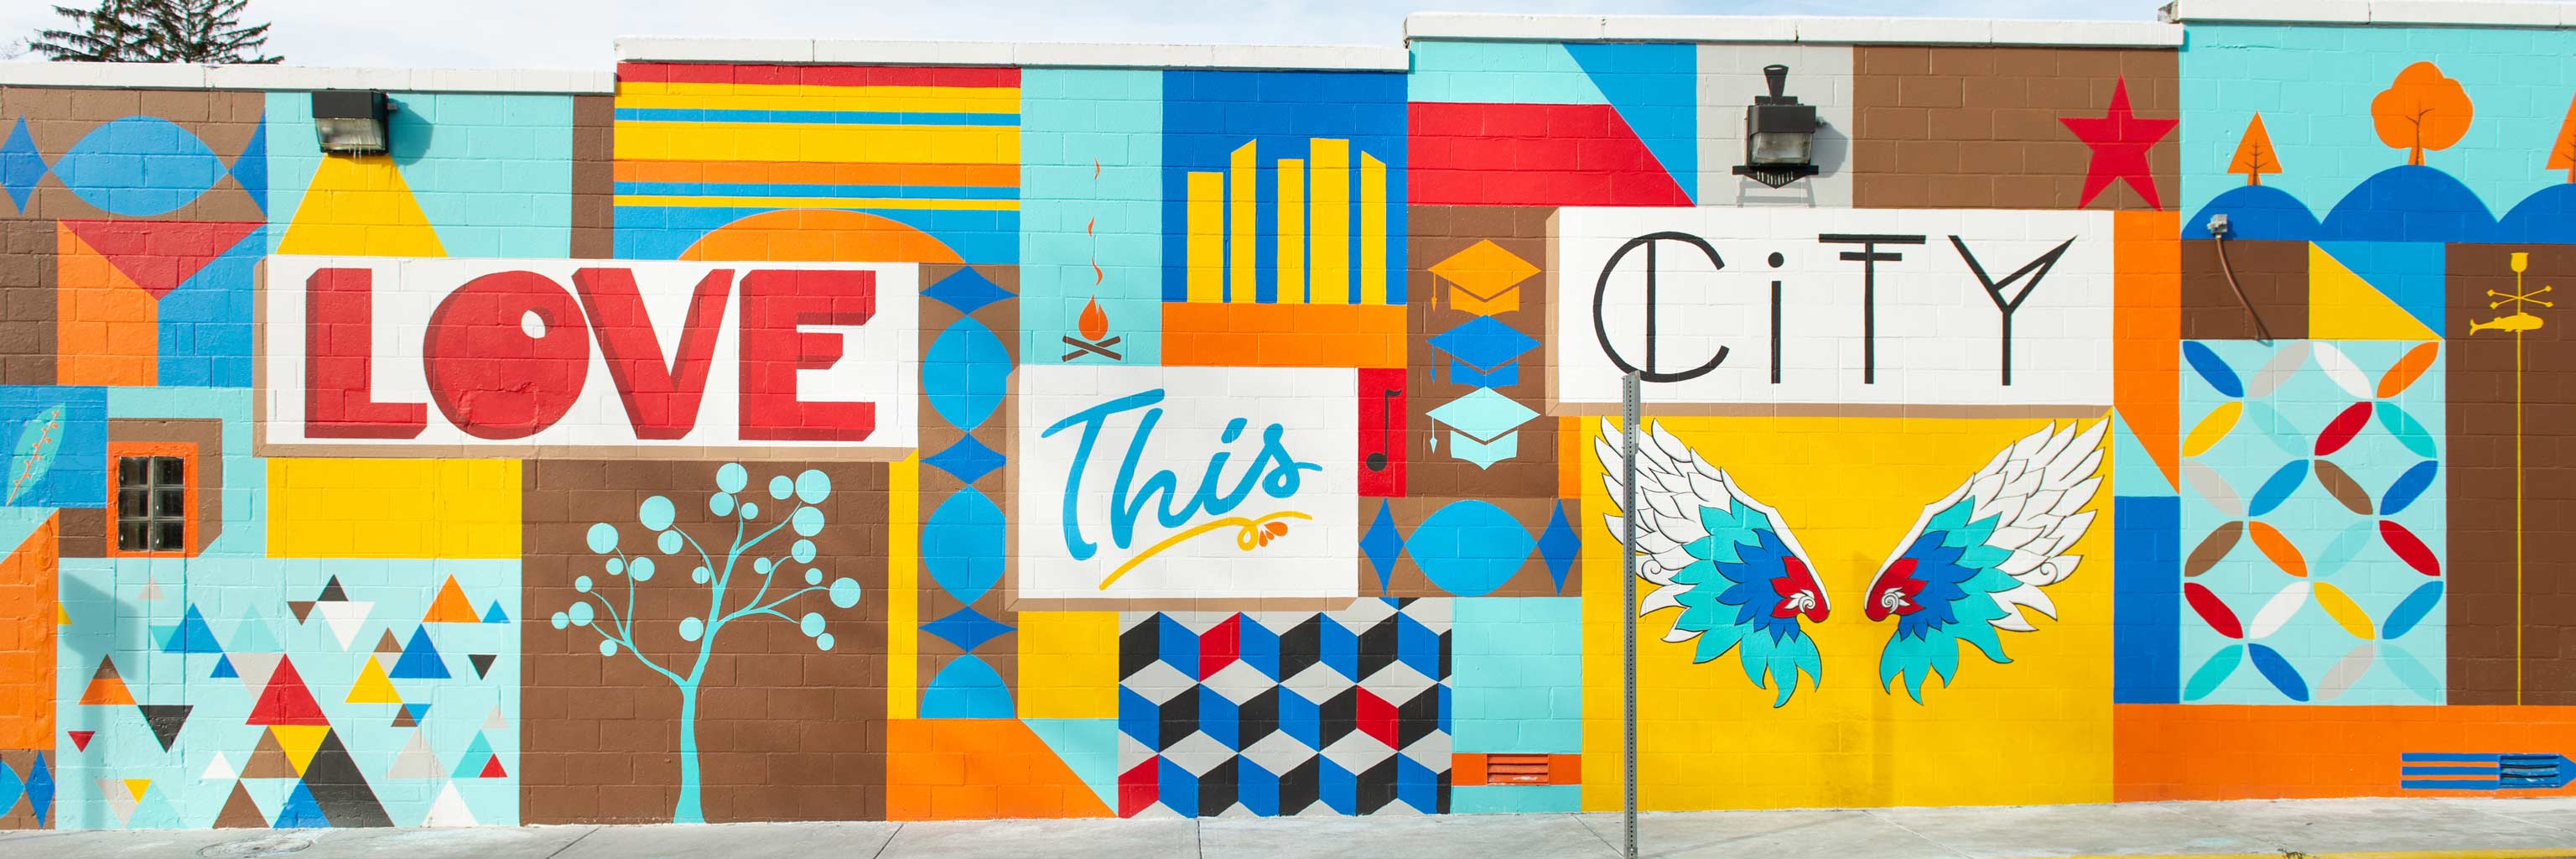 The "Love this city" mural located in downtown Bloomington, Indiana.